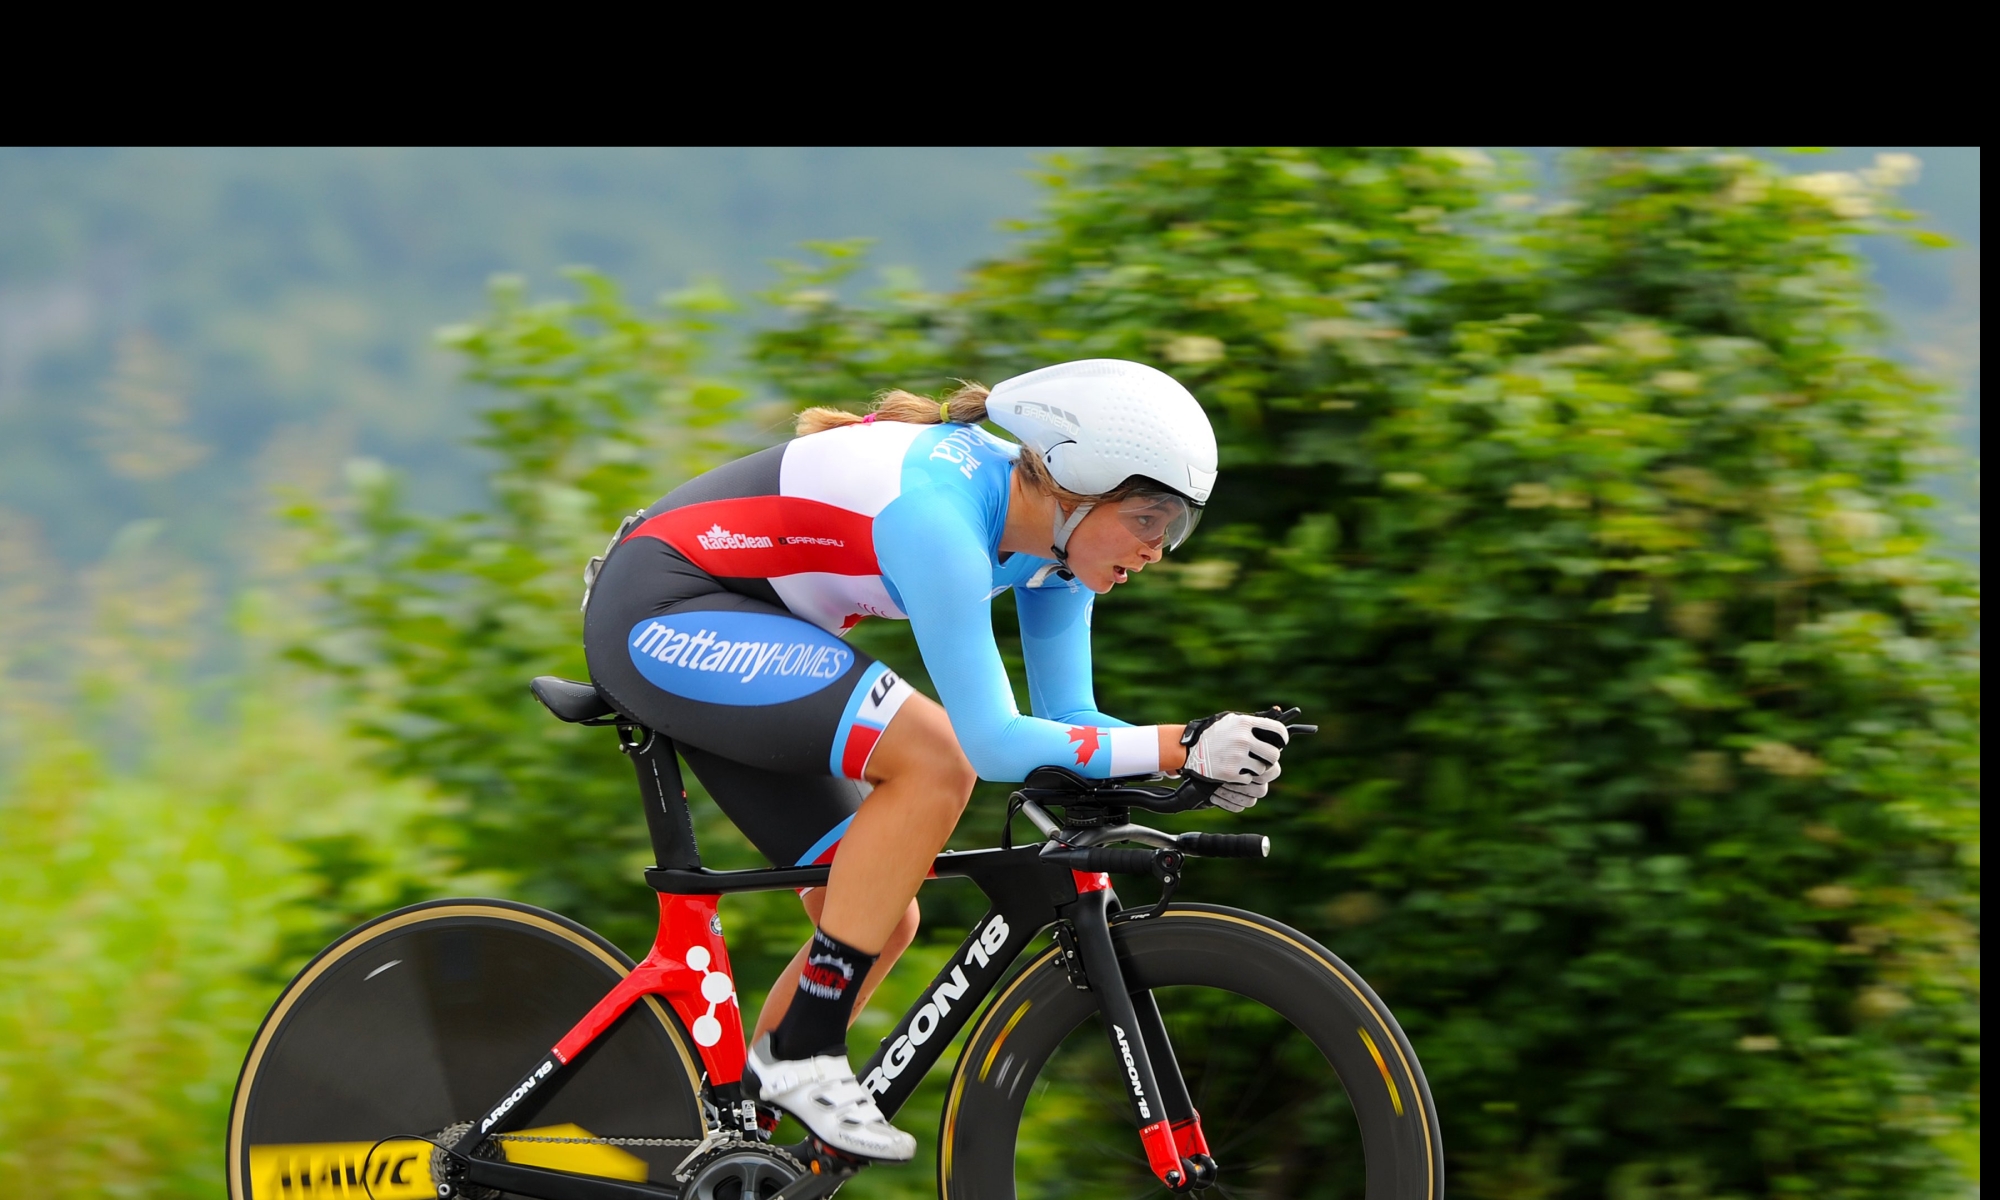 Keely Shaw cycling